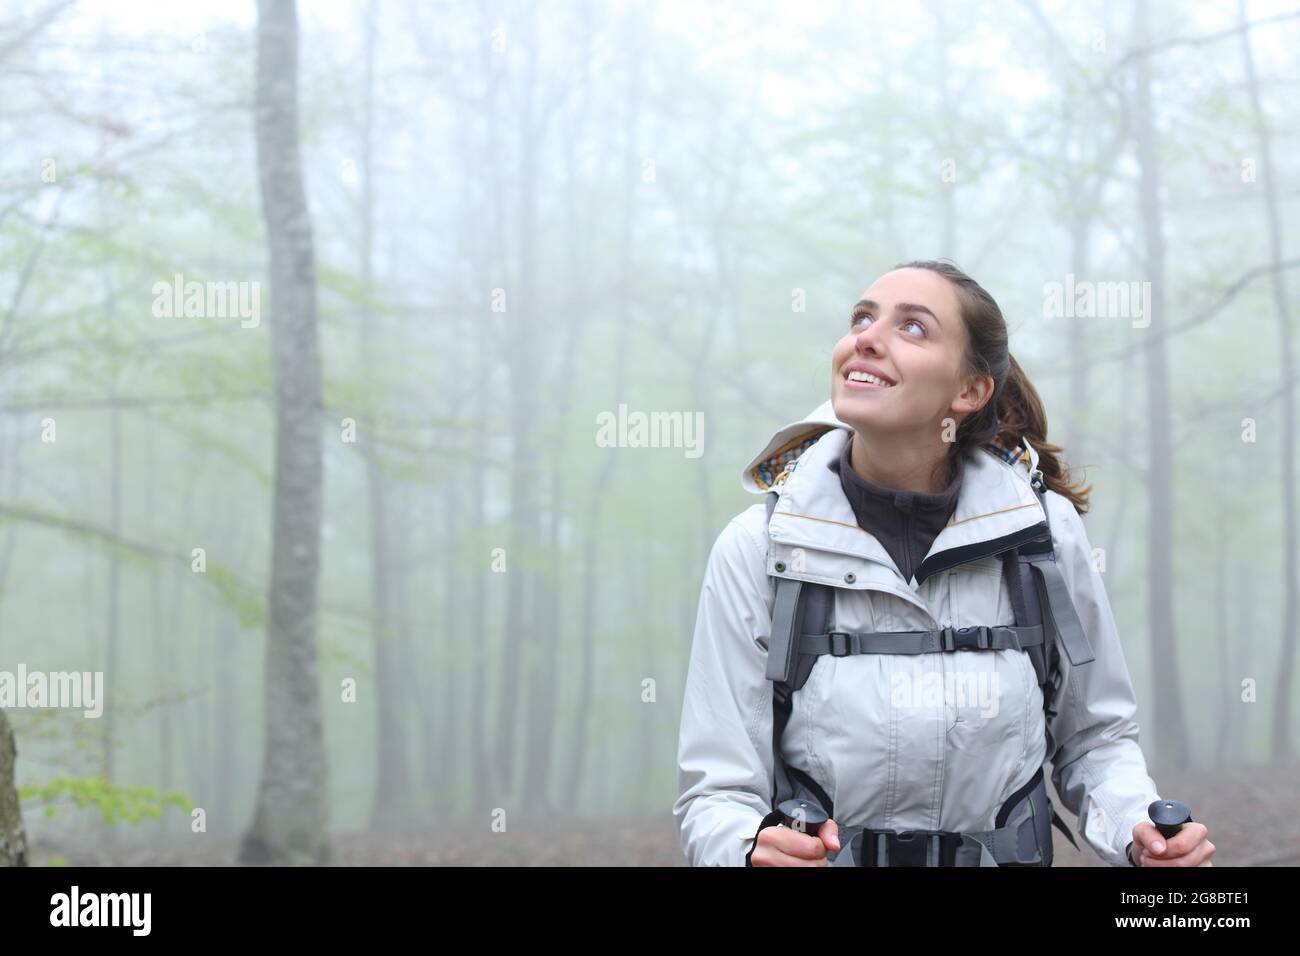 Front view portrait of an amazed trekker walking looking above in a foggy forest Stock Photo